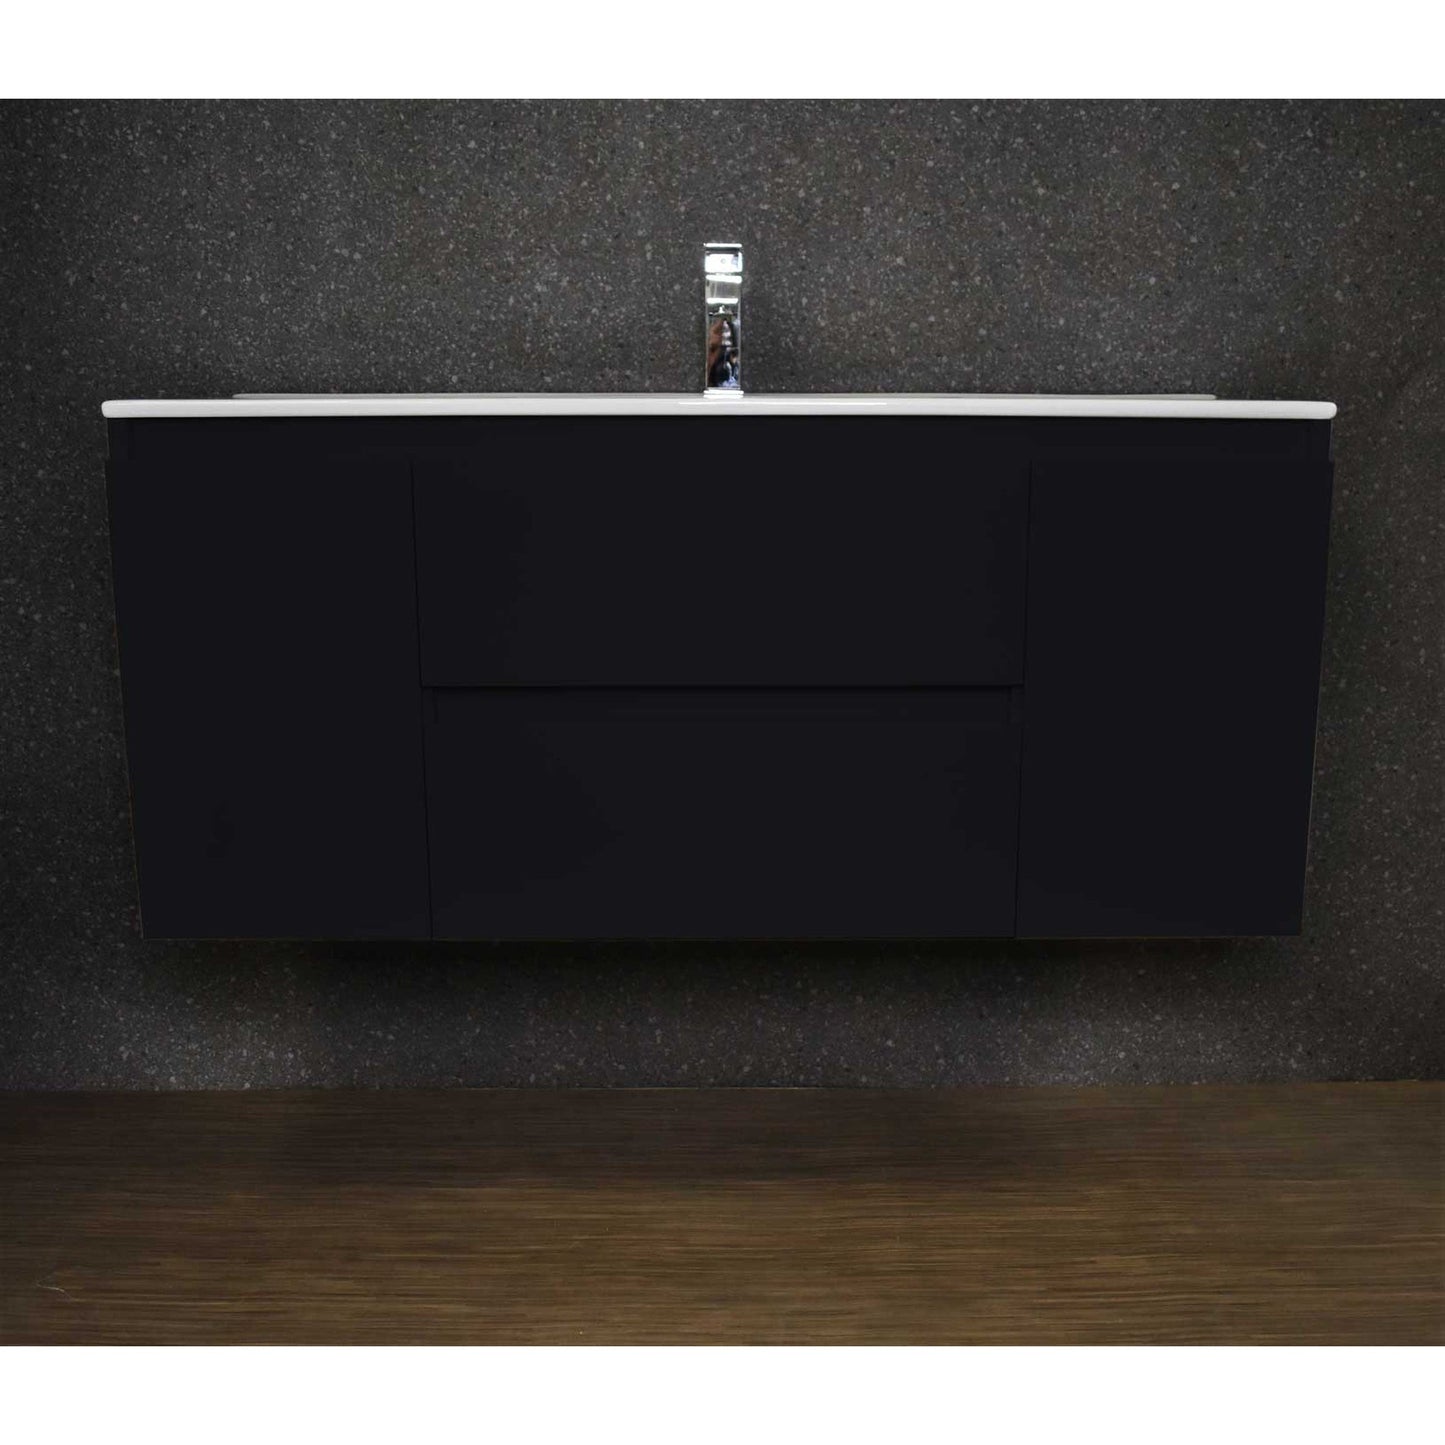 Volpa USA Salt 48" x 18" Glossy Black Wall-Mounted Floating Bathroom Vanity With Drawers, Integrated Porcelain Ceramic Top and Integrated Ceramic Sink